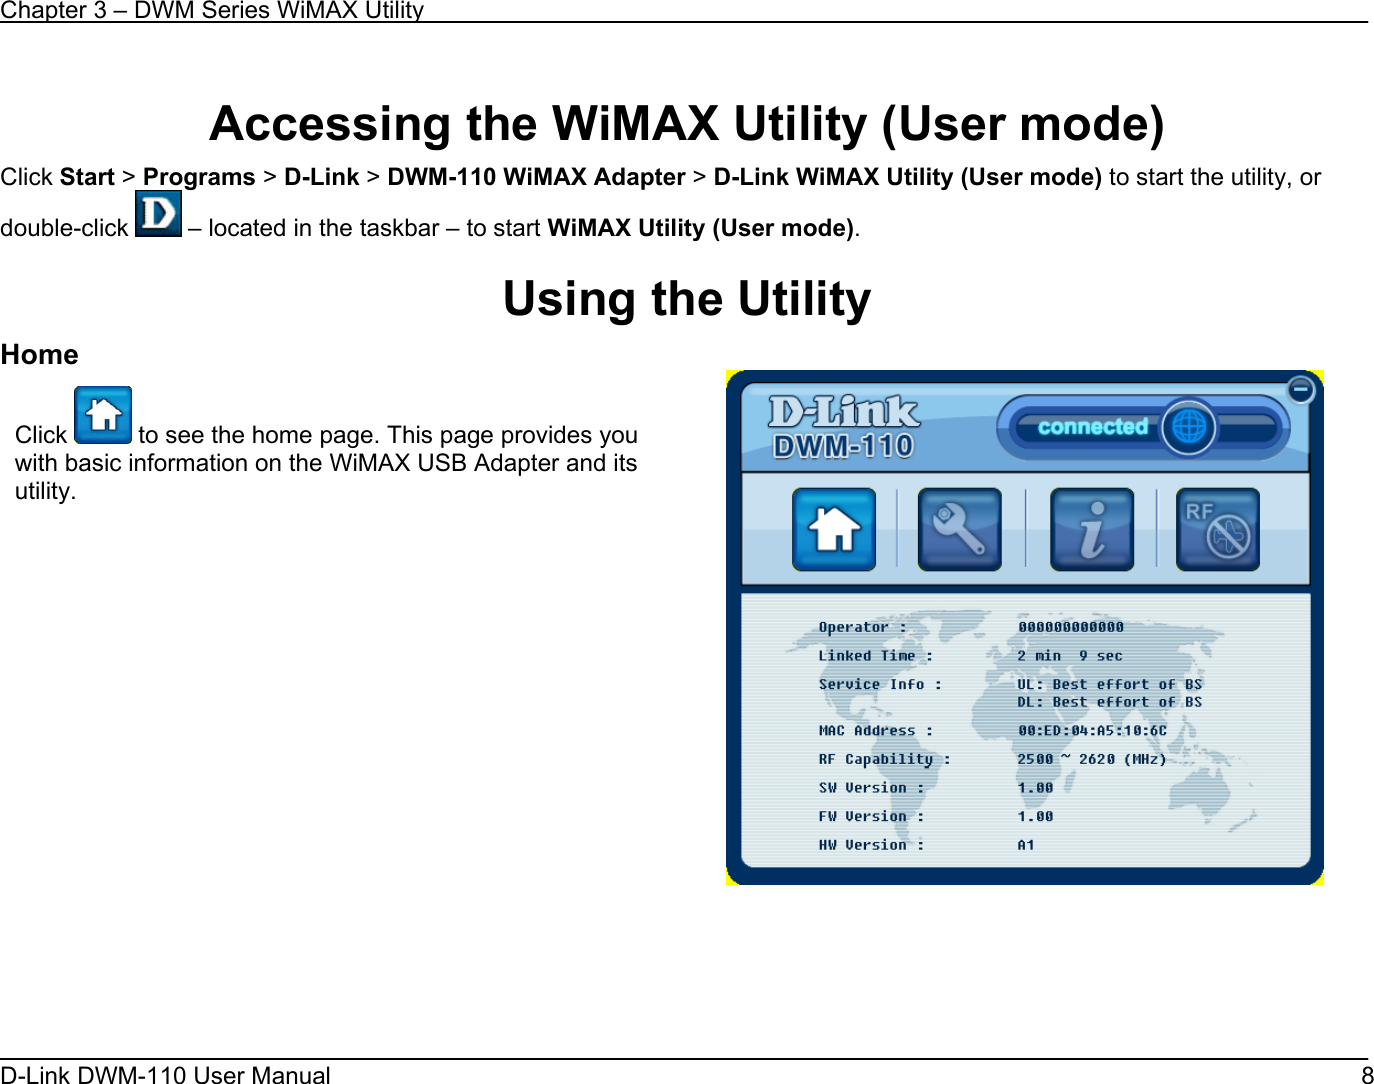 Chapter 3 – DWM Series WiMAX Utility D-Link DWM-110 User Manual   8  Accessing the WiMAX Utility (User mode) Click Start &gt; Programs &gt; D-Link &gt; DWM-110 WiMAX Adapter &gt; D-Link WiMAX Utility (User mode) to start the utility, or double-click   – located in the taskbar – to start WiMAX Utility (User mode).  Using the Utility Home      Click   to see the home page. This page provides you with basic information on the WiMAX USB Adapter and its utility.              